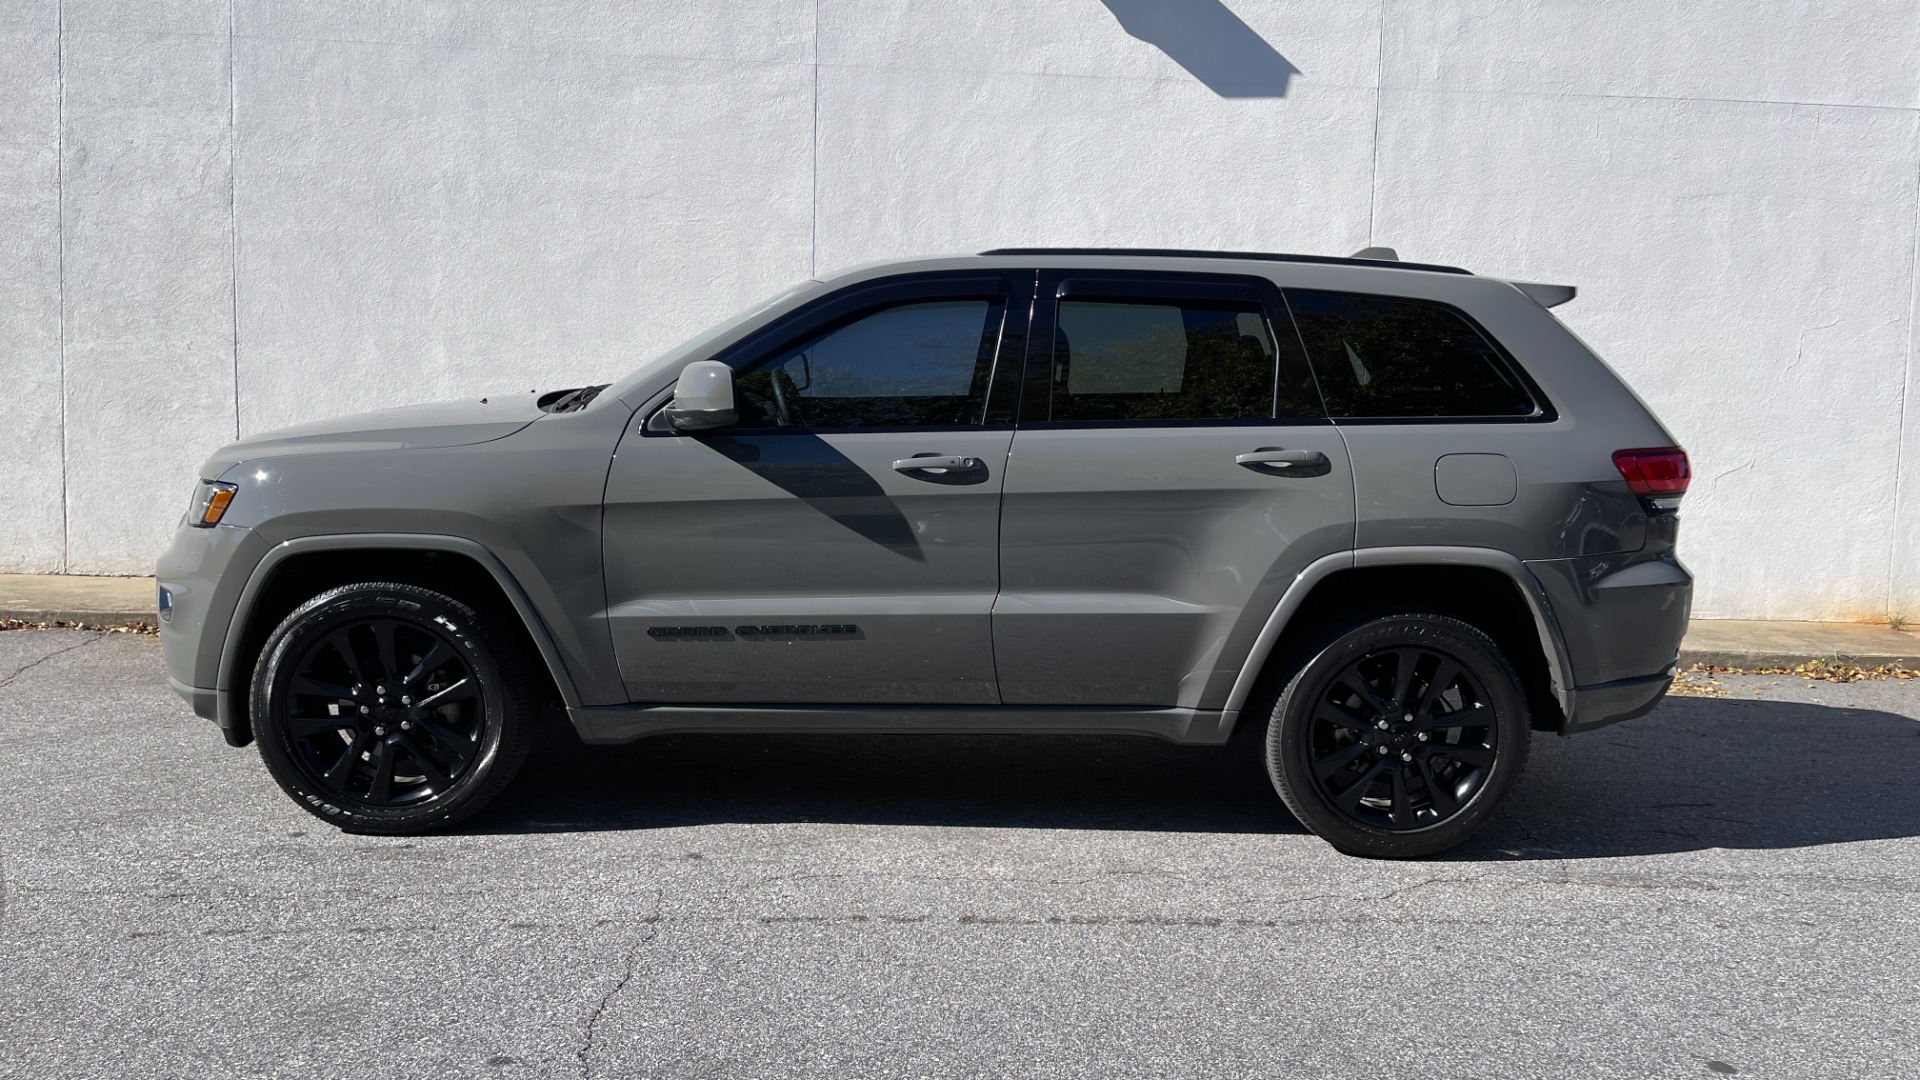 Used 2019 Jeep Grand Cherokee ALTITUDE / BLACK 20IN WHEELS / BLACK TRIM / SUNROOF / HEATED SEATS for sale Sold at Formula Imports in Charlotte NC 28227 5